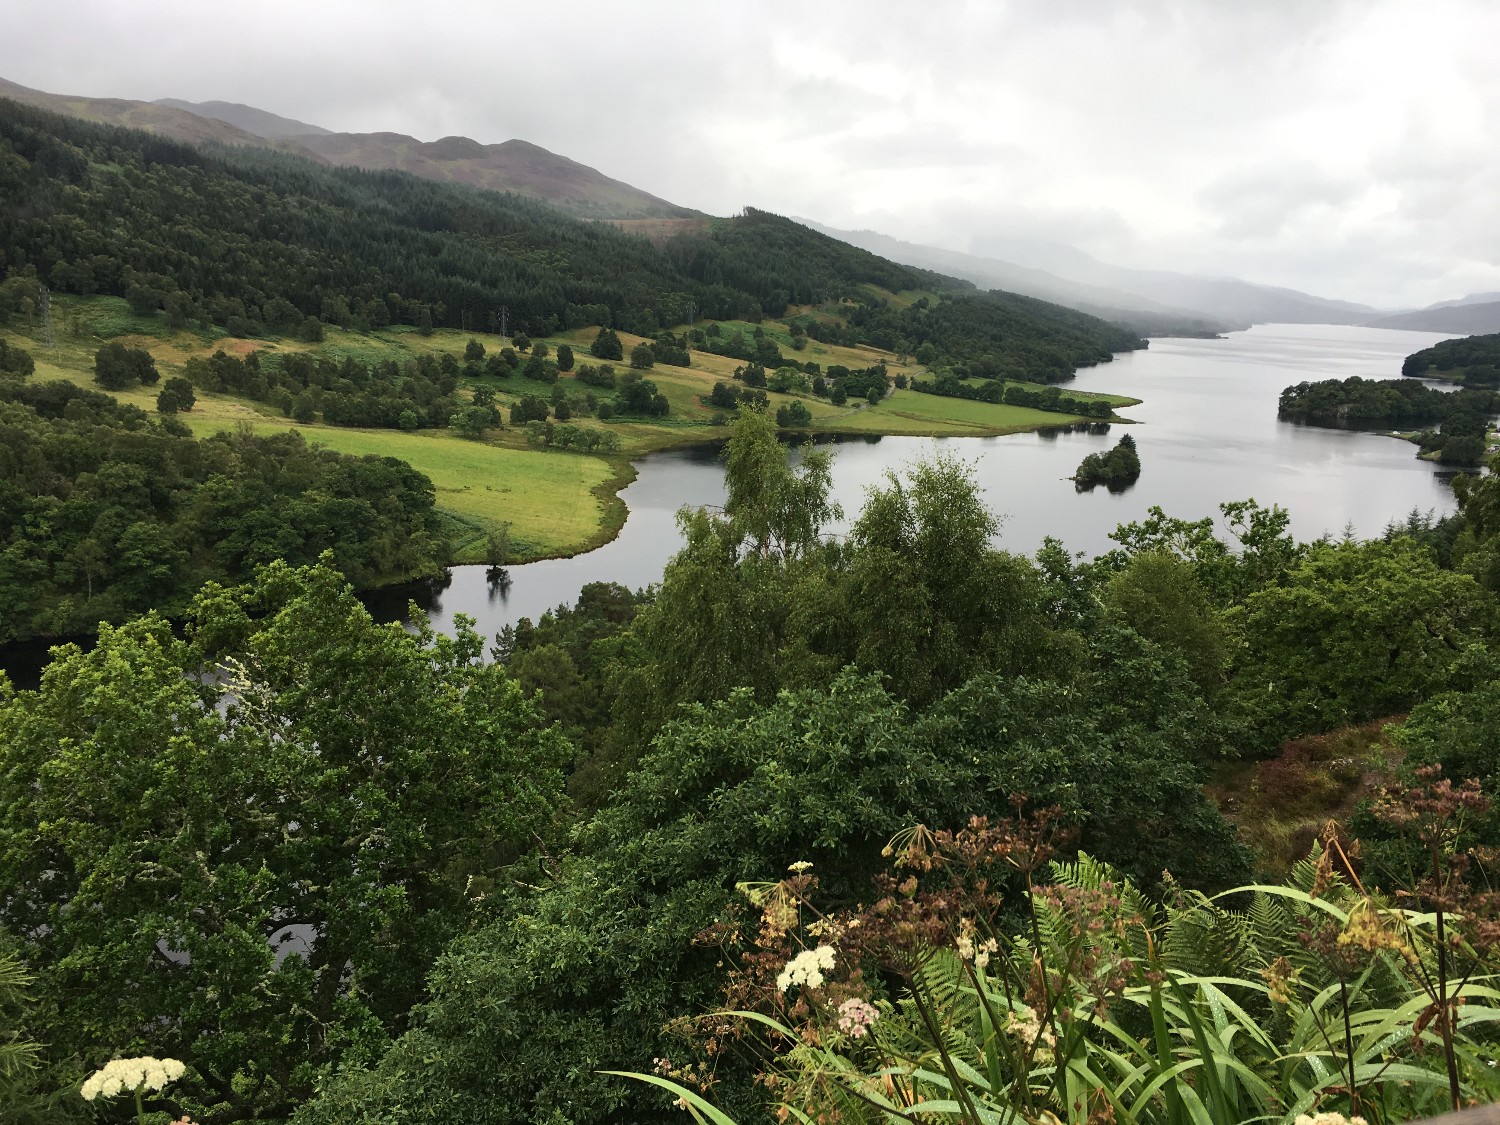 Queens View in Pitlochry - an easy day trip from Edinburgh for this lush vista over Loch Tummel